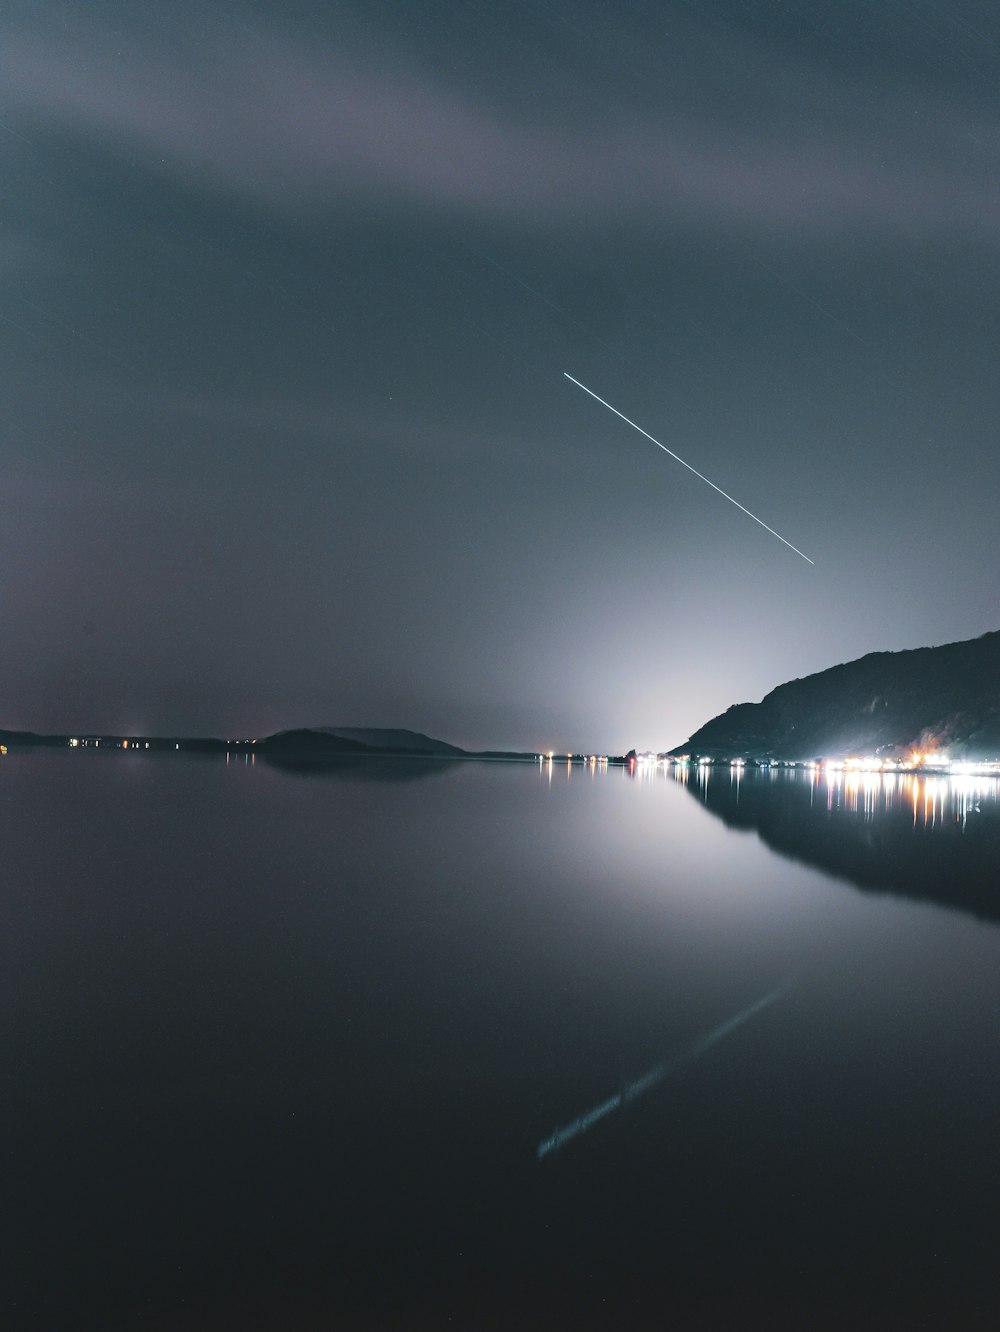 an airplane flying over a body of water at night